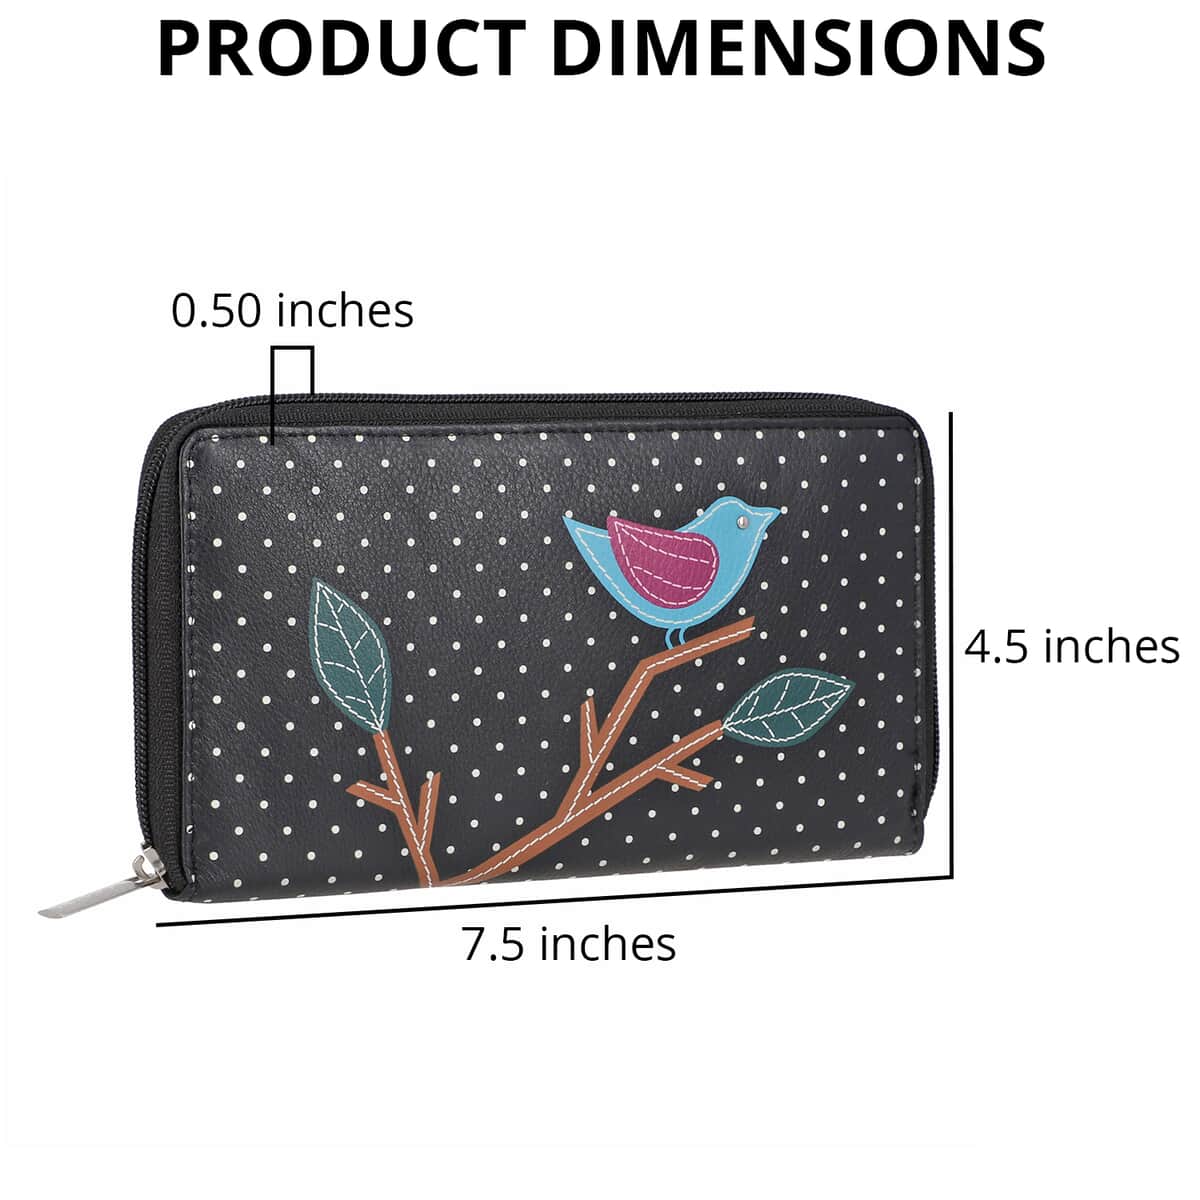 "UNION CODE -RFID Protected 100% Genuine Leather Applique Women's Wallet  THEME: Bird Sitting on Tree SIZE: 7.5(L)x4.5(W)x0.5(H) inches COLOR: black" image number 3